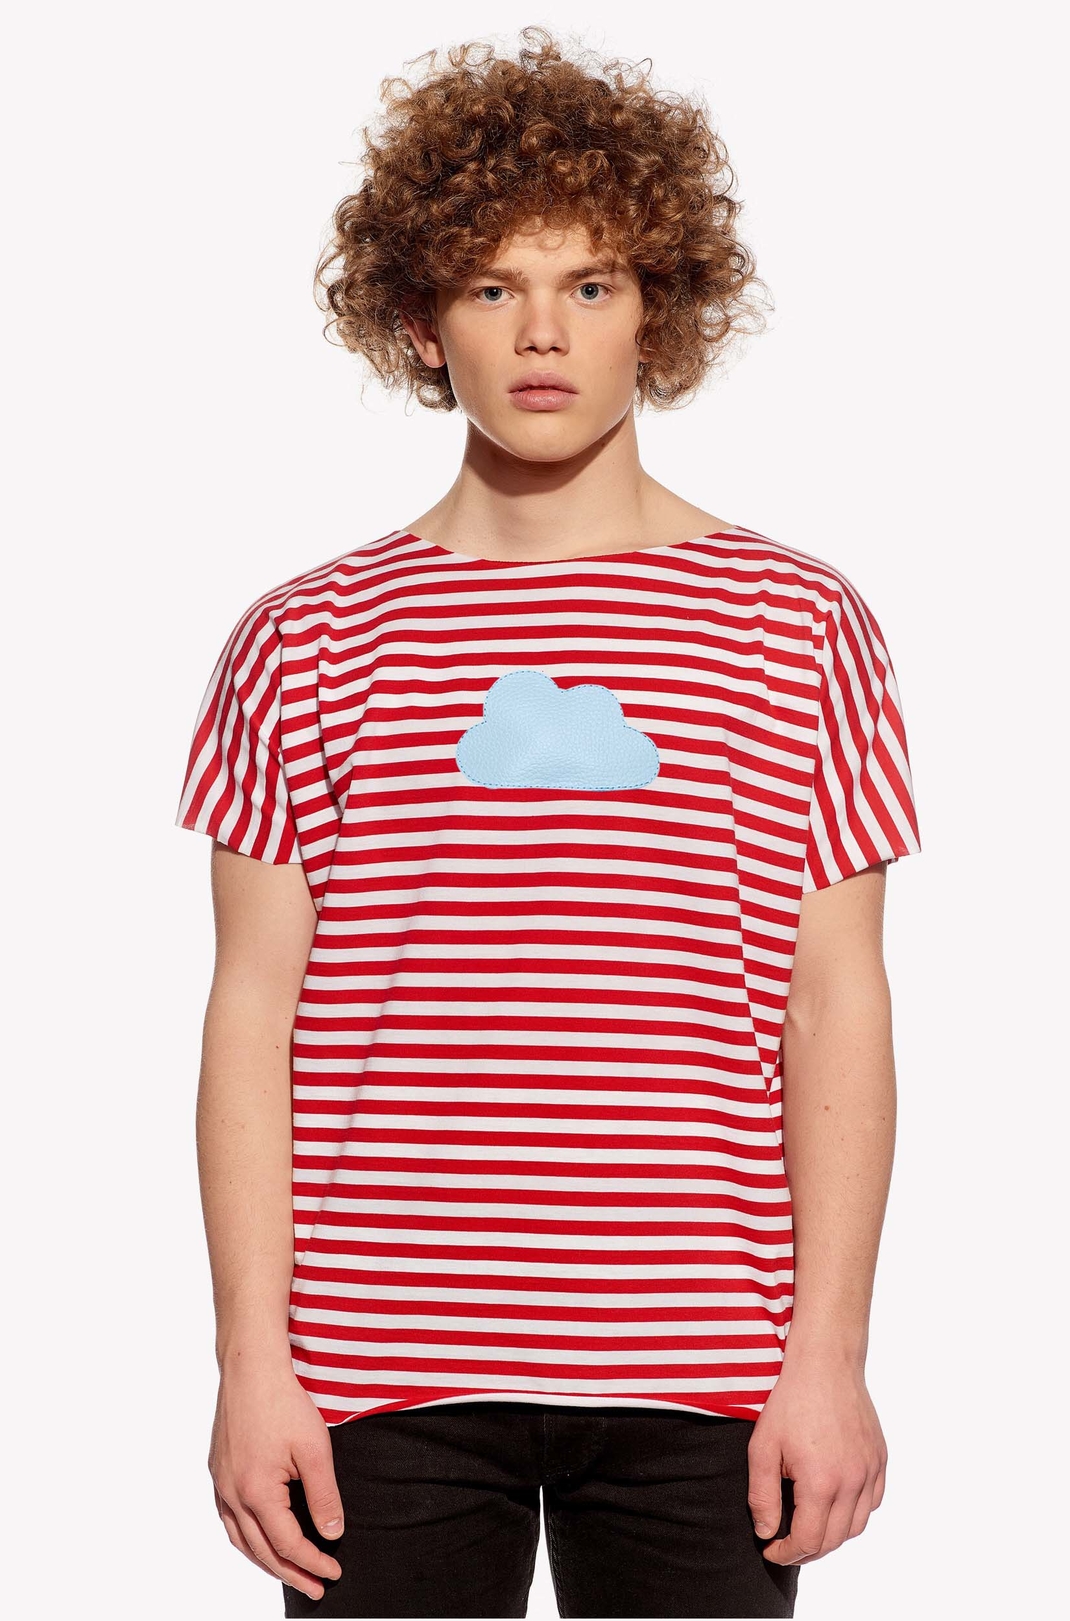 Shirt with cloud